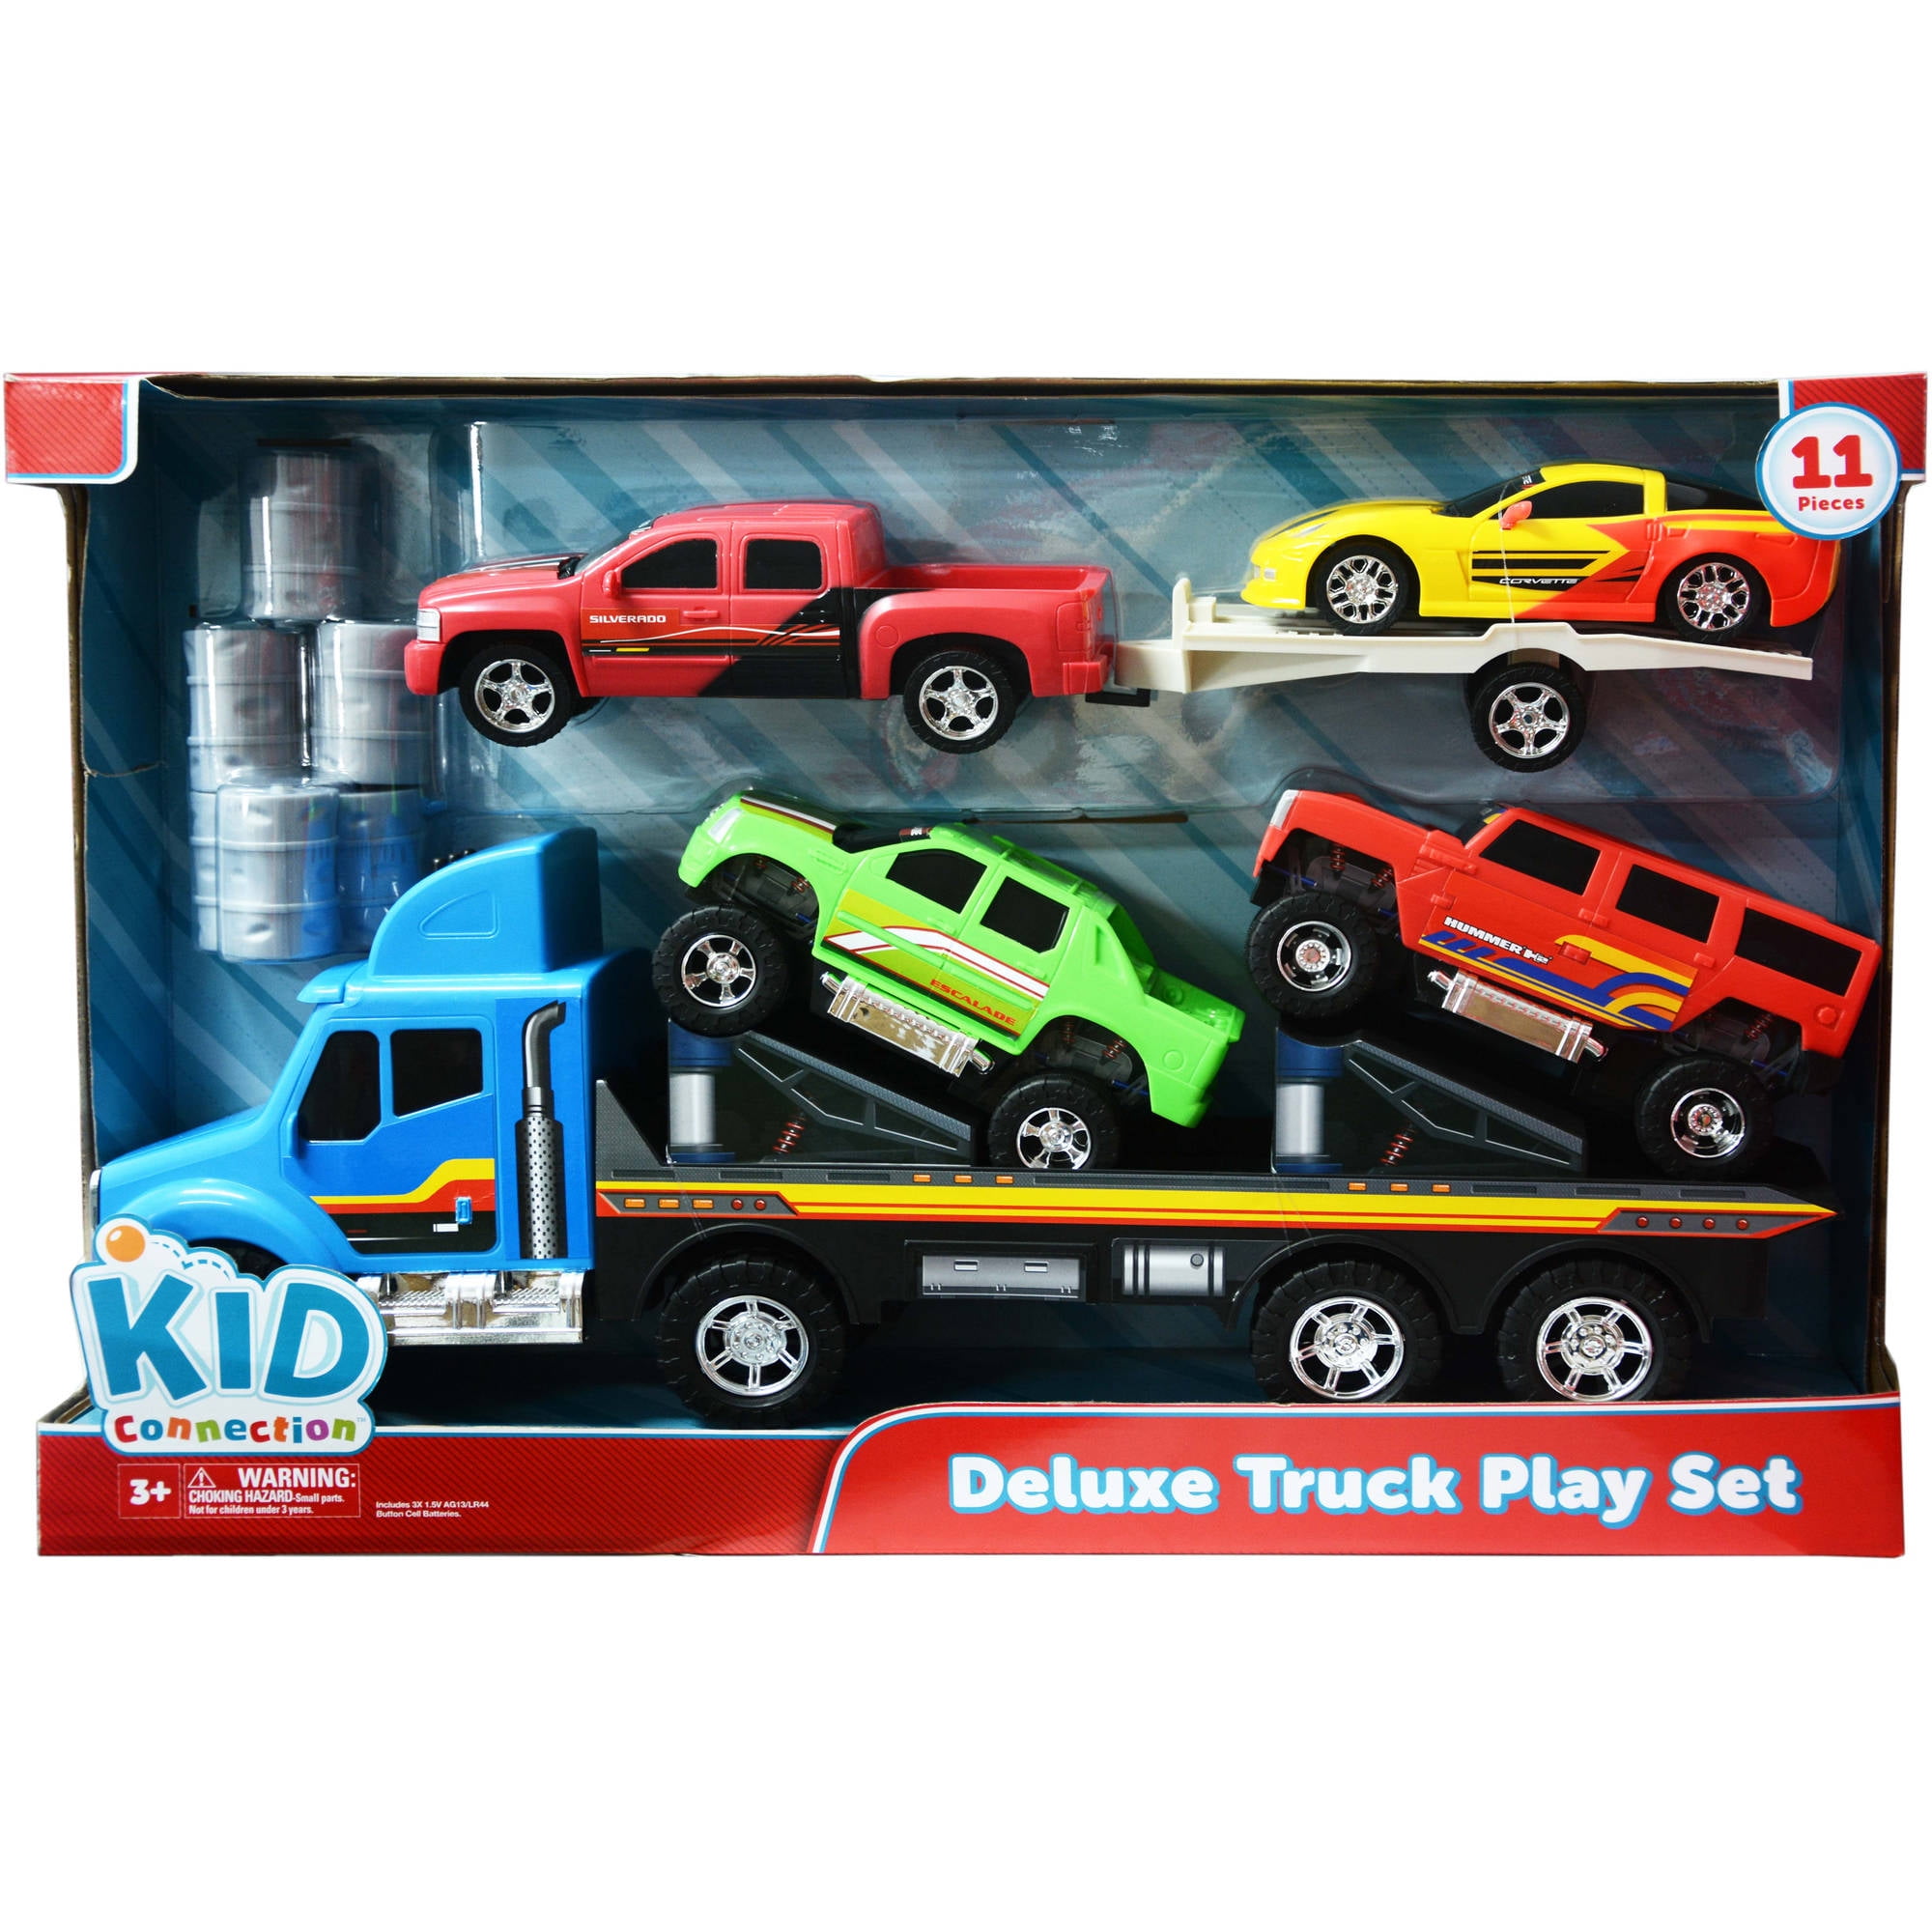 Kid Connection Deluxe GM Truck Play Set 